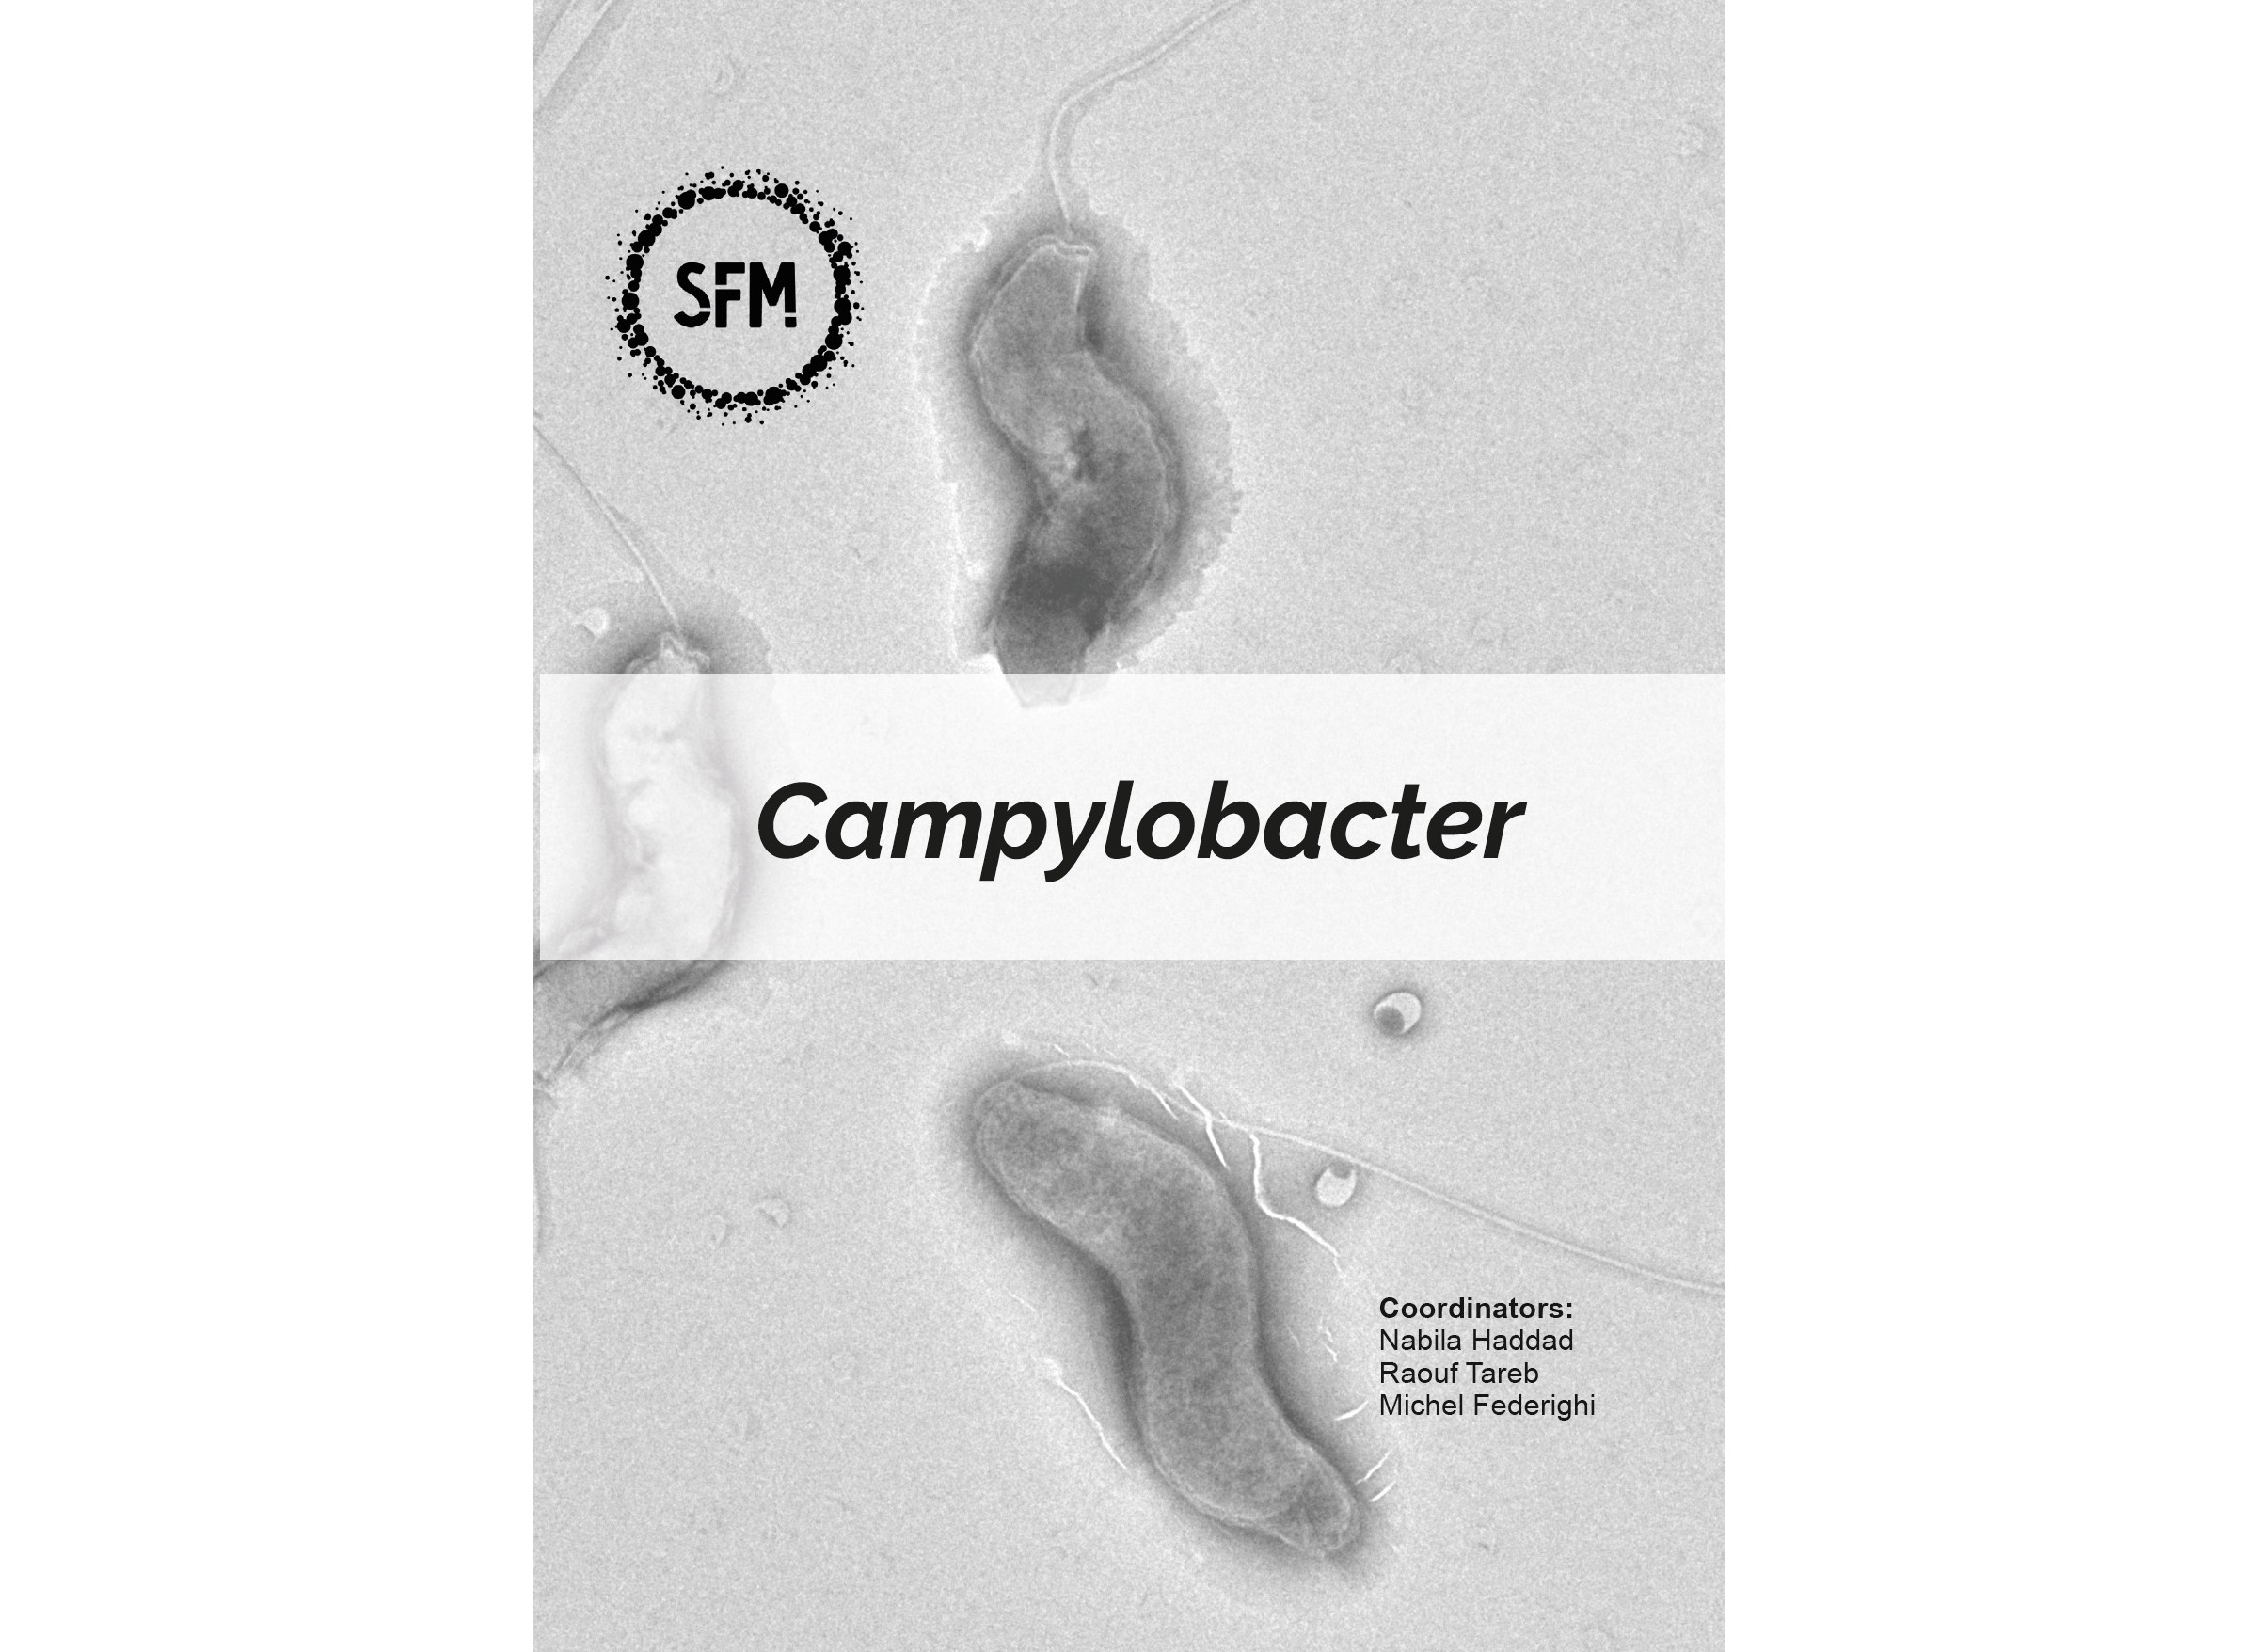 New release of a book on Campylobacter 